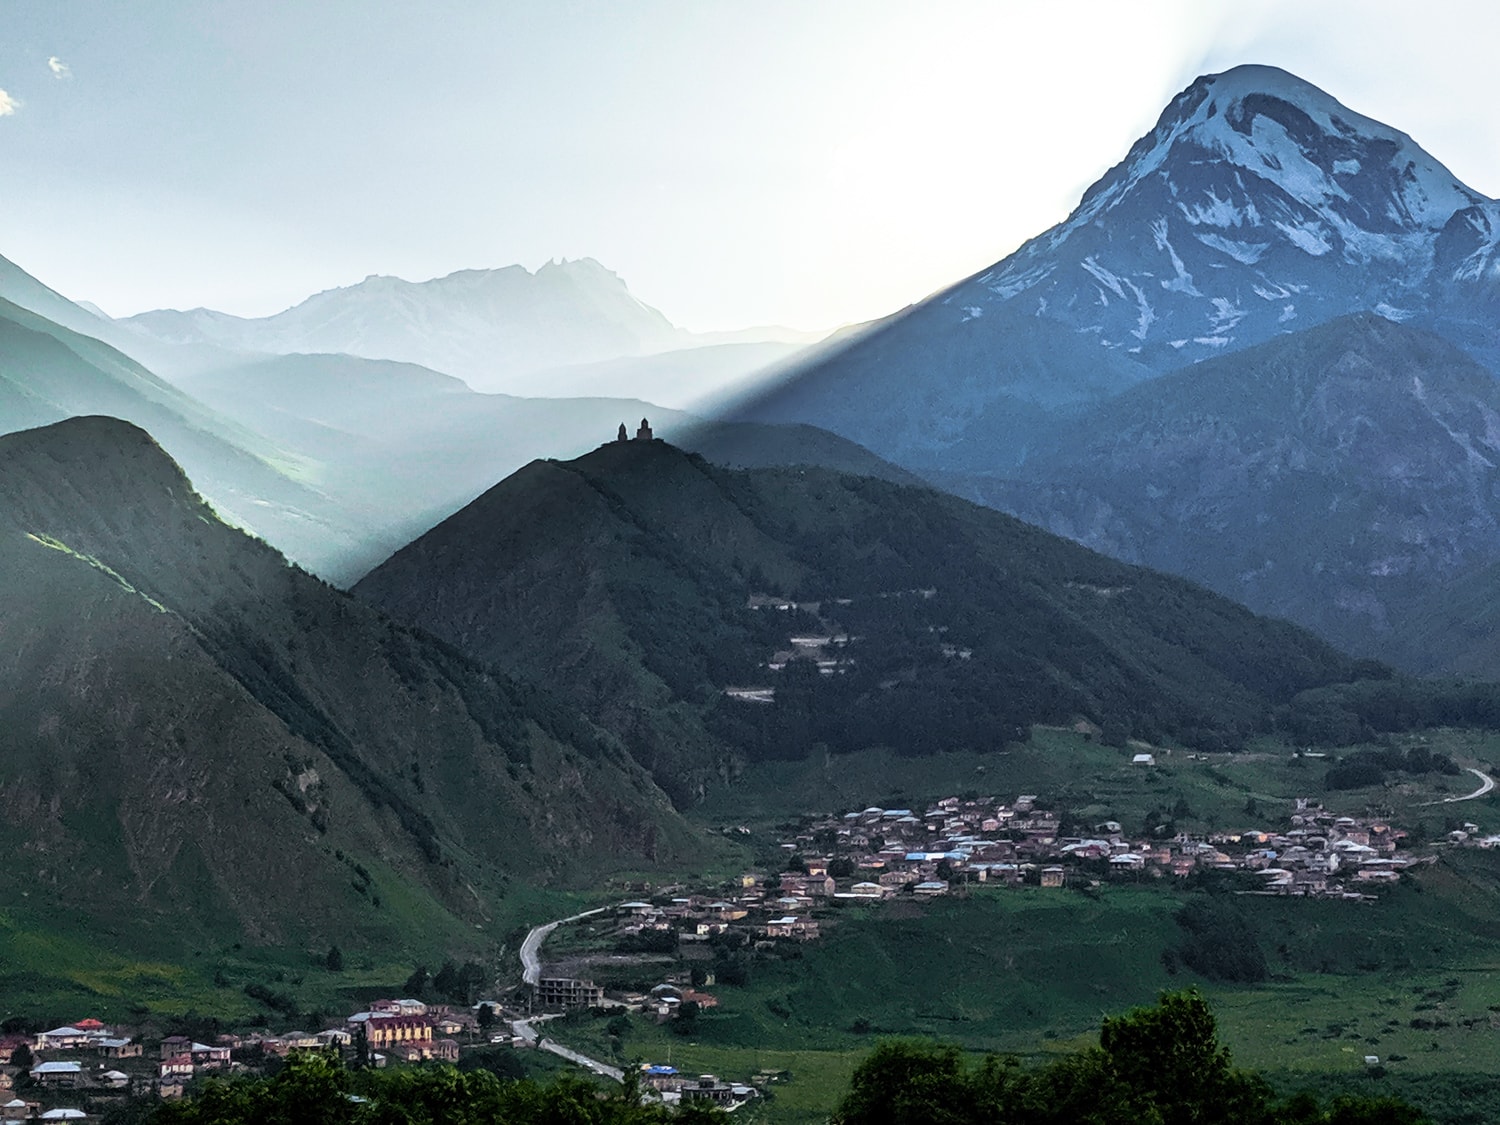 Image of The Gergeti Trinity Church in the shadow of Mount Kazbek